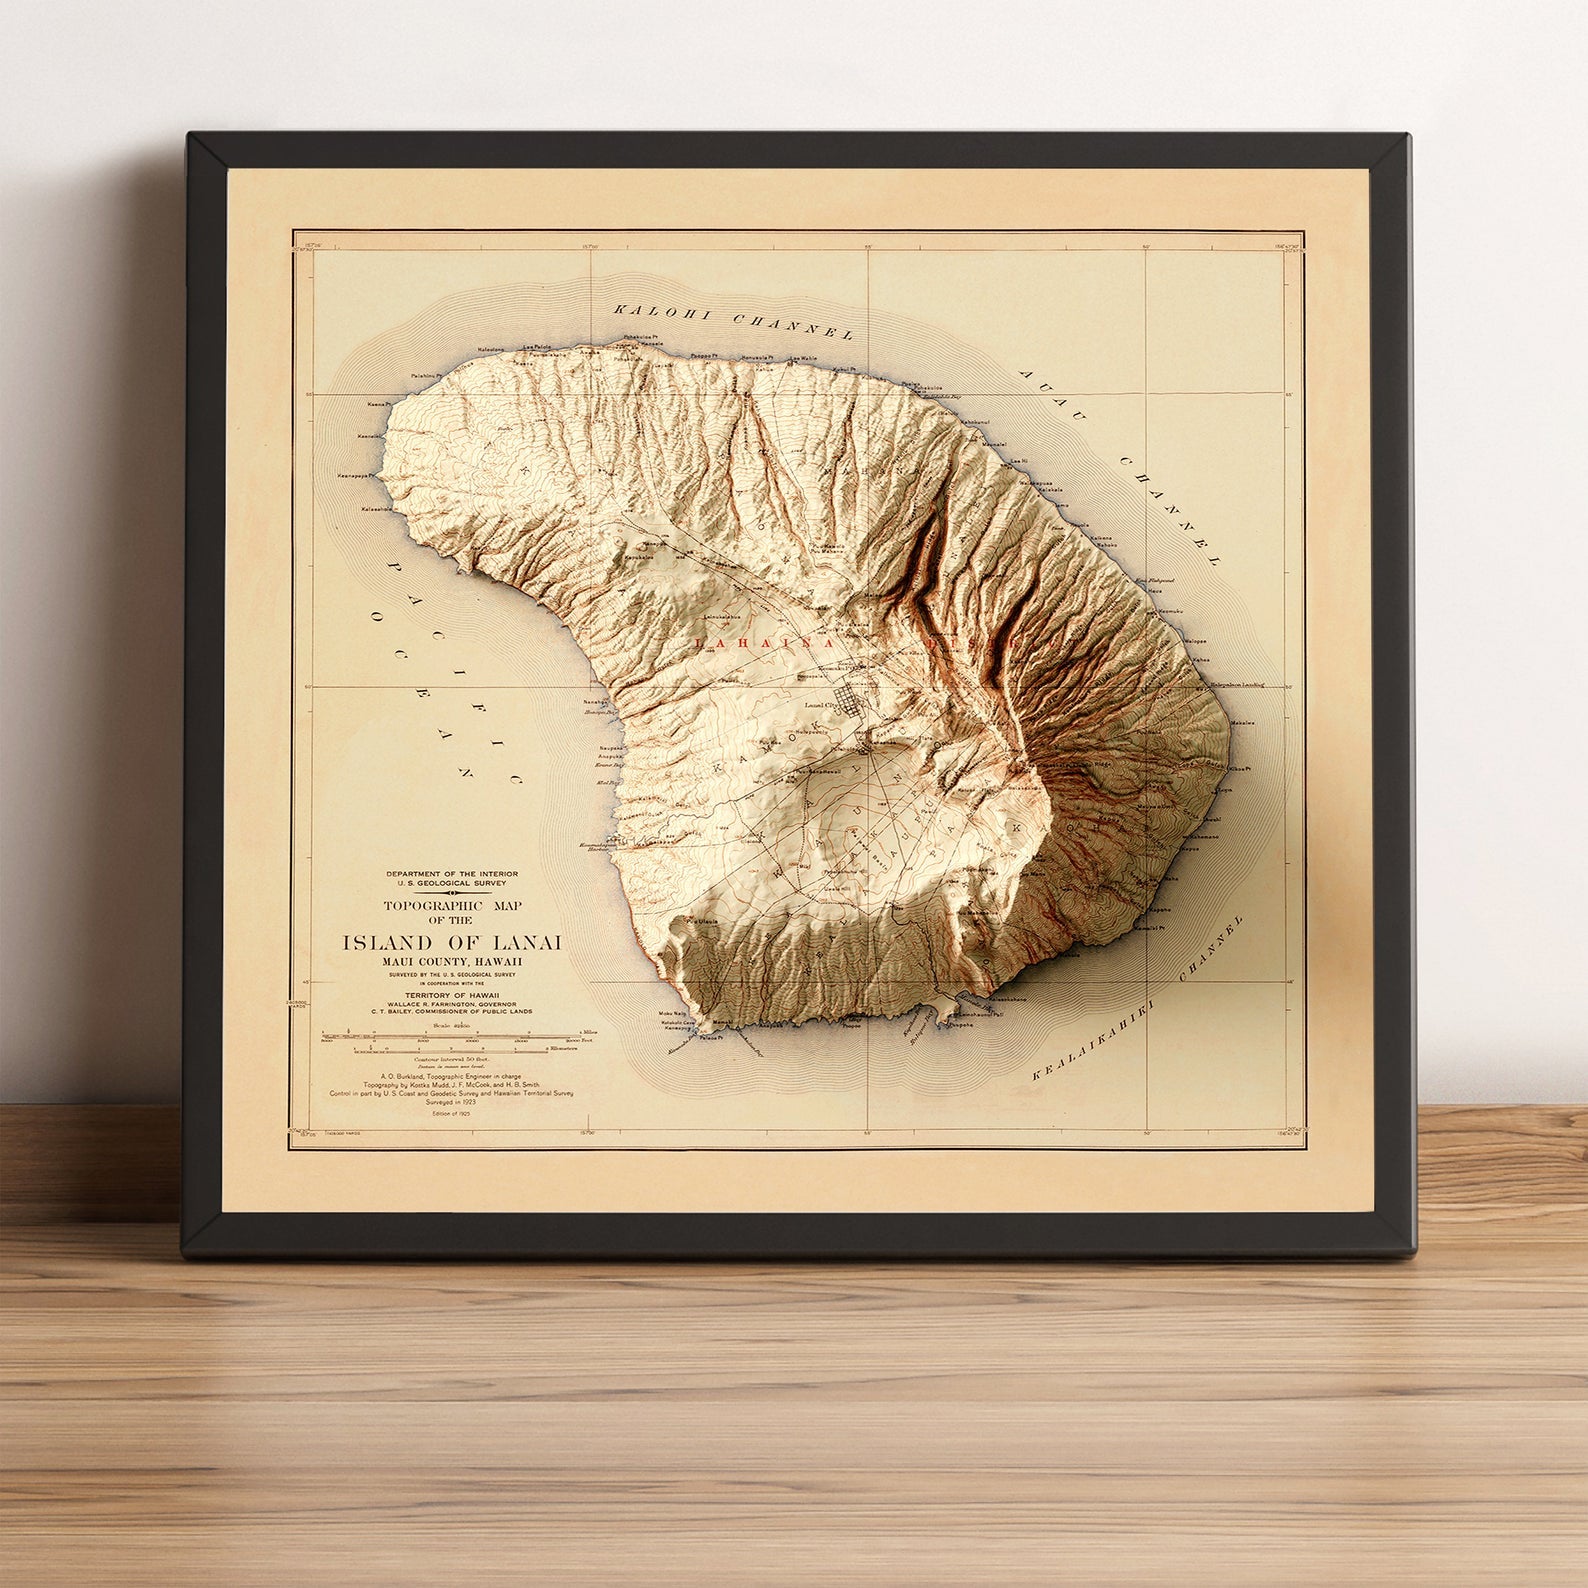 Image showing a vintage relief of the hawaiian island of Lanai